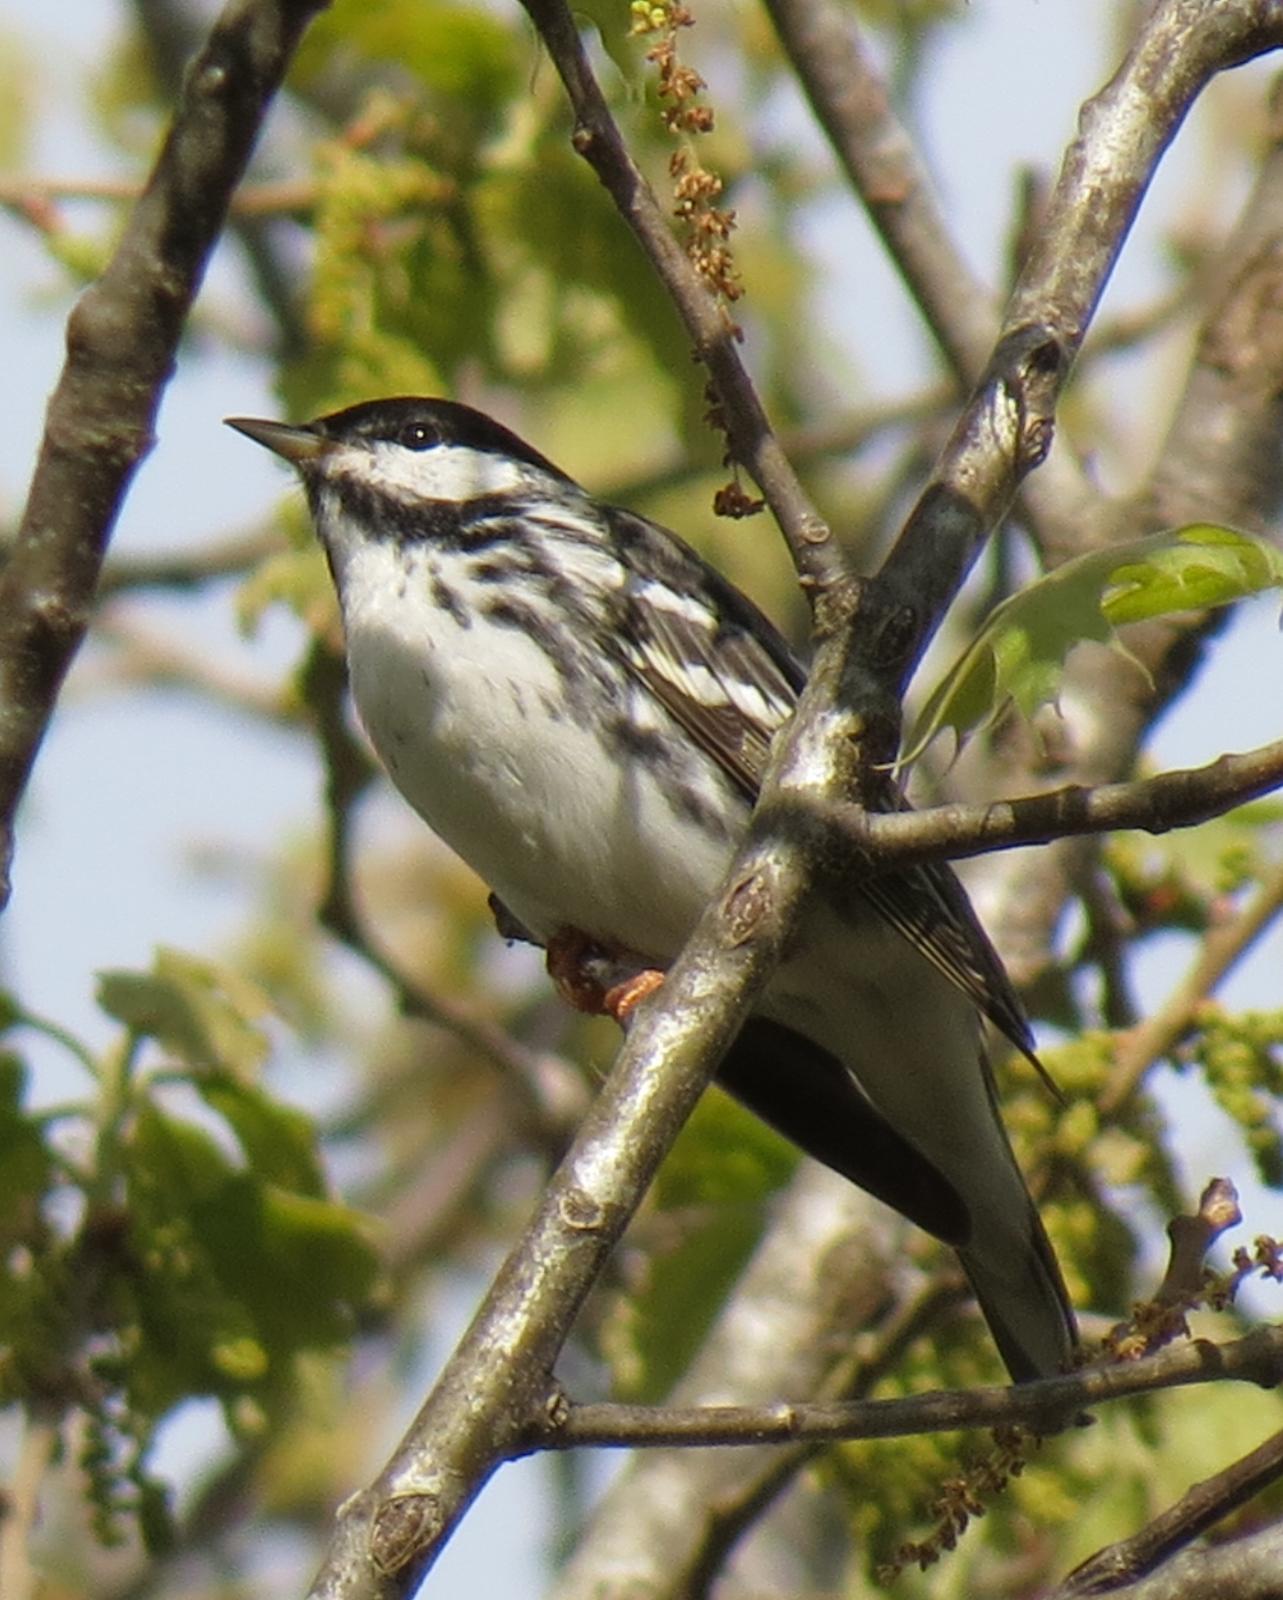 Blackpoll Warbler Photo by Andrew T. Kinslow